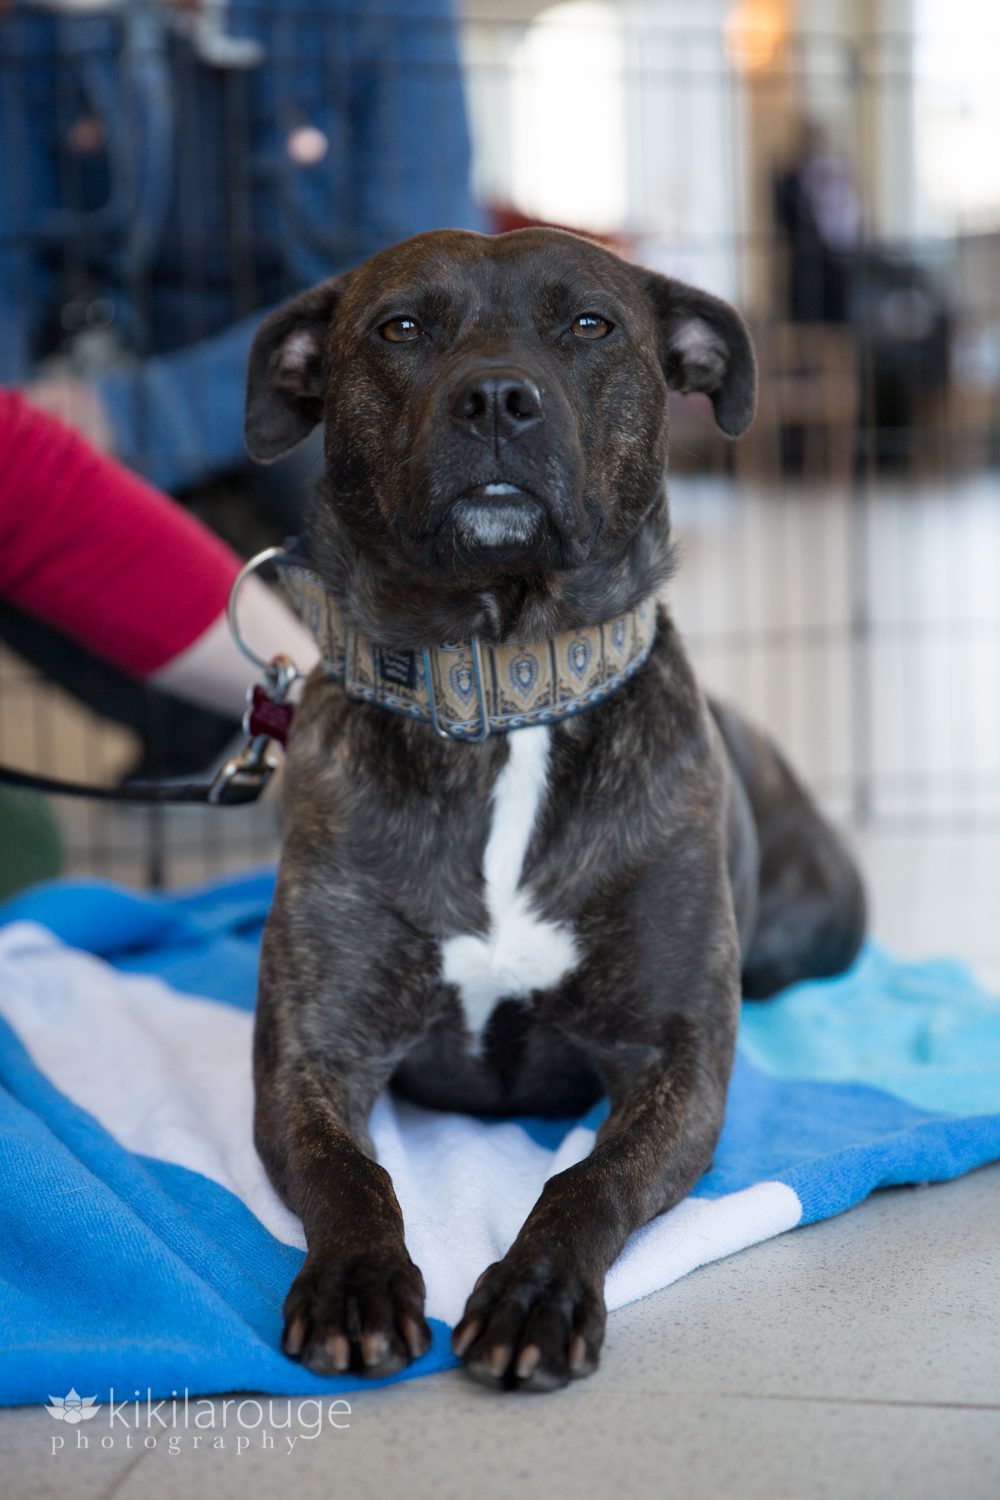 Bridle pit mix rescue dog with blue blanket